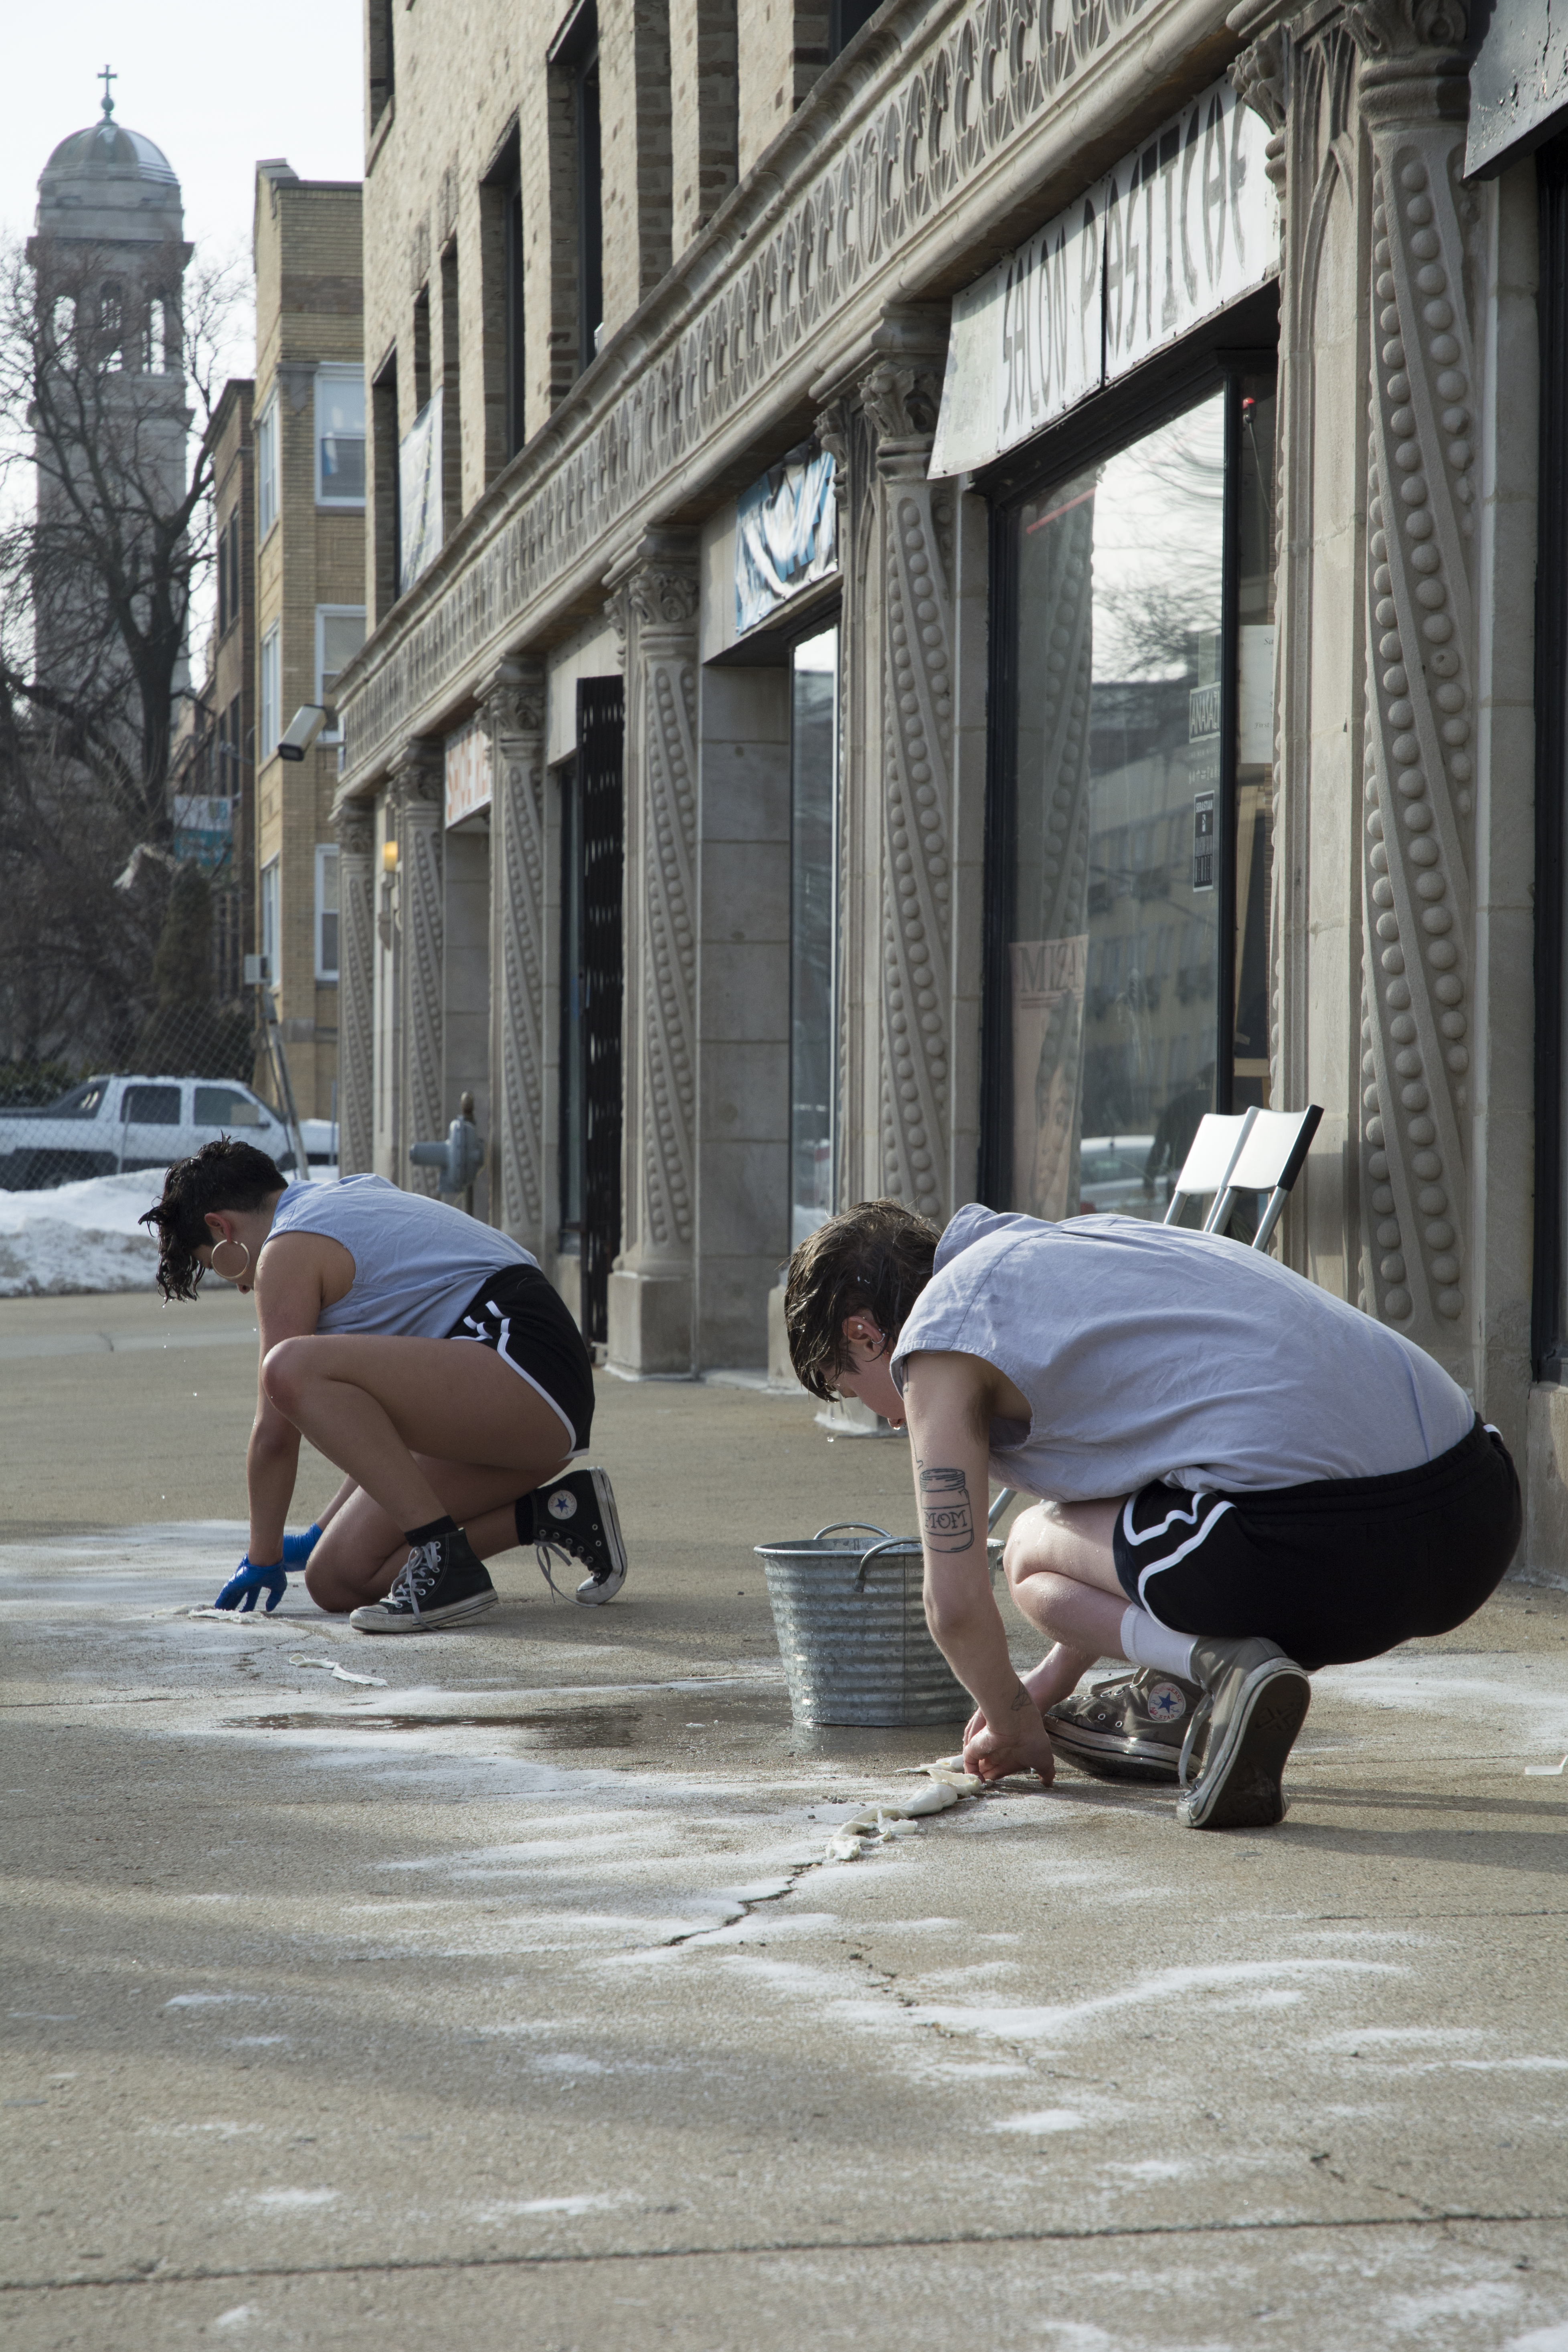 This is a still image of a performance taking place on the sidewalk outside the gallery. Two performers in matching outfits (grey-blue sleeveless shirt, black athletic shorts with white stripes, Converse All-Star sneakers) crouch on the sidewalk, facing away from the camera. A metal basin and puddle of water are on the sidewalk between them, and their hair is wet and dripping. Their hands are on the ground (one performer wearing blue gloves and the other not wearing gloves), pressing or stretching a white cloth or paper onto the concrete. Behind them are storefronts, buildings, and a sizable pile of snow.